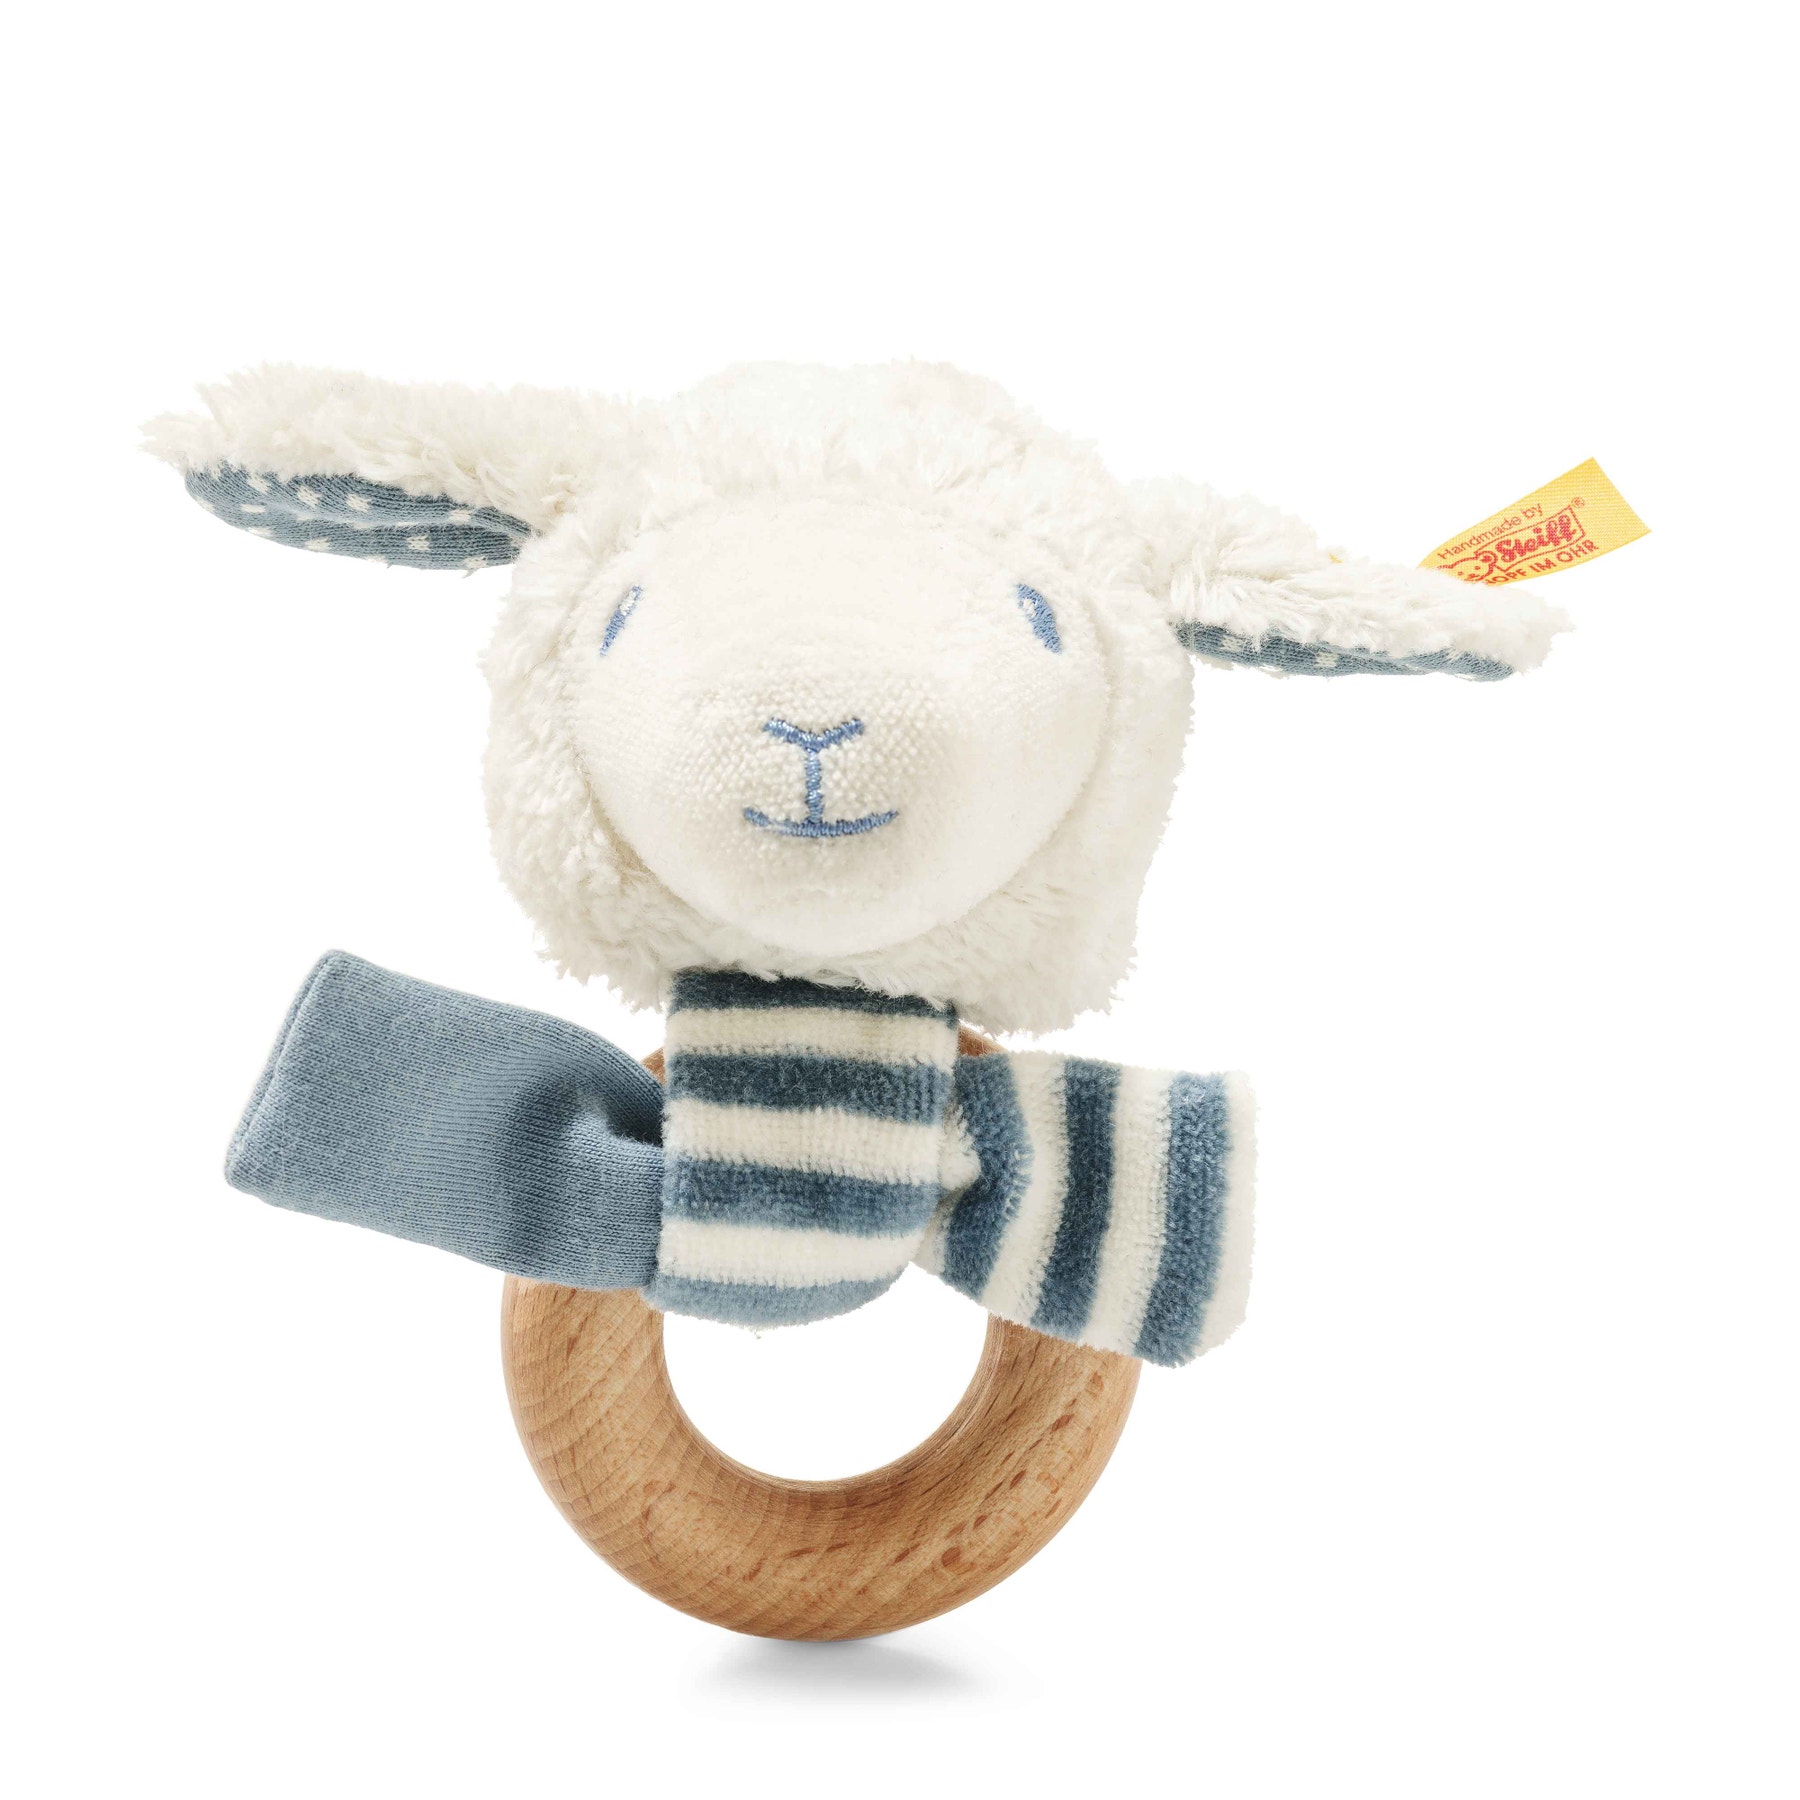 Leno lambgrip toy with rattle